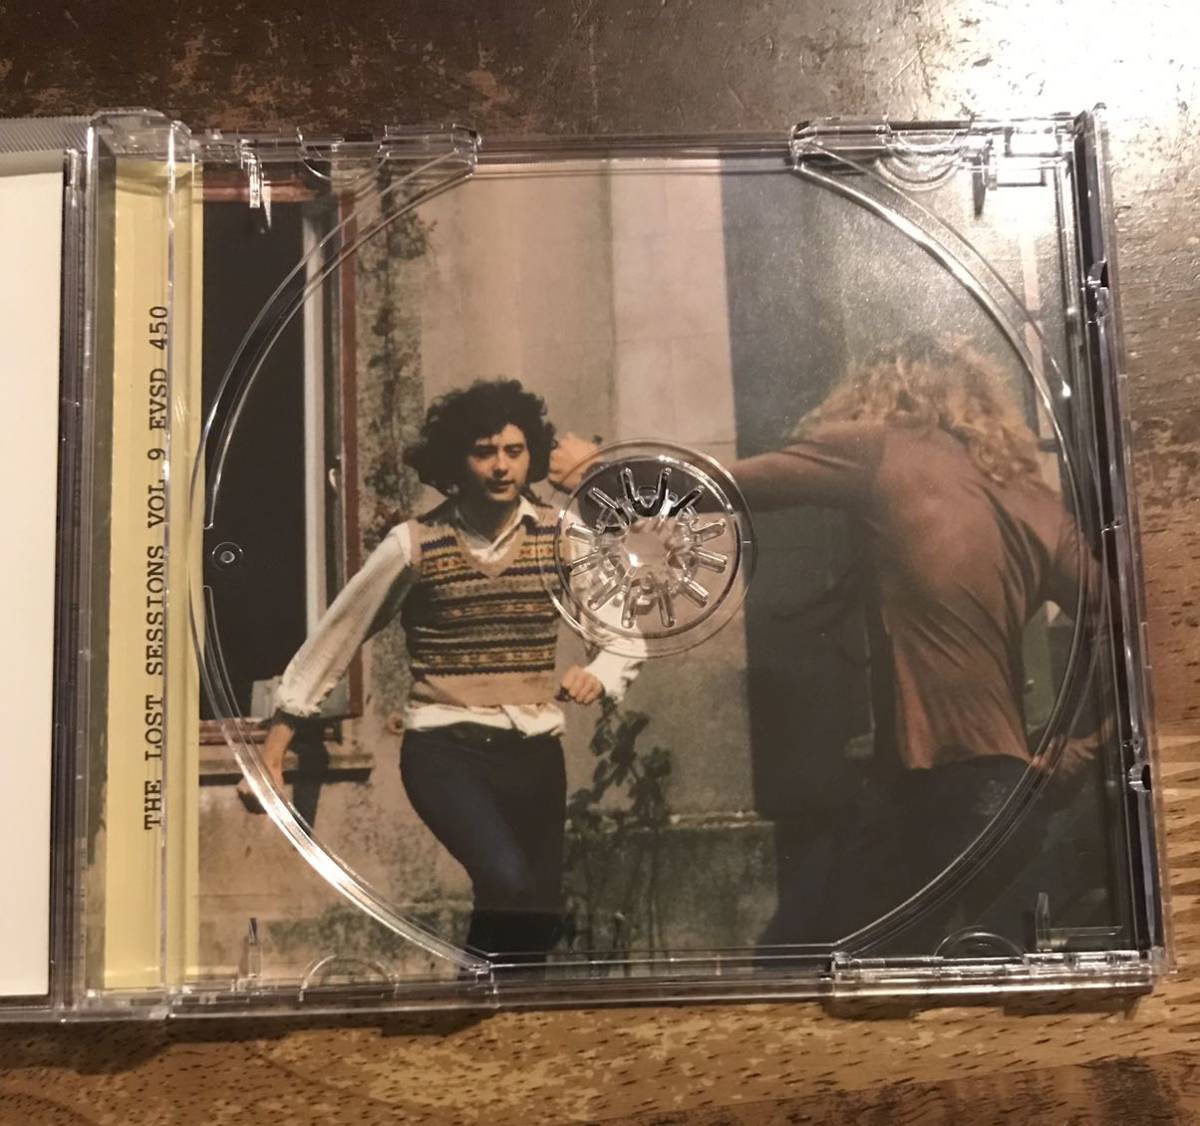 Led Zeppelin レッドツェッペリン ■ The Lost Sessions Vol.9: All Roads Lead To Headley Grange (1CD) Empress Valley Supreme Disk “_画像5